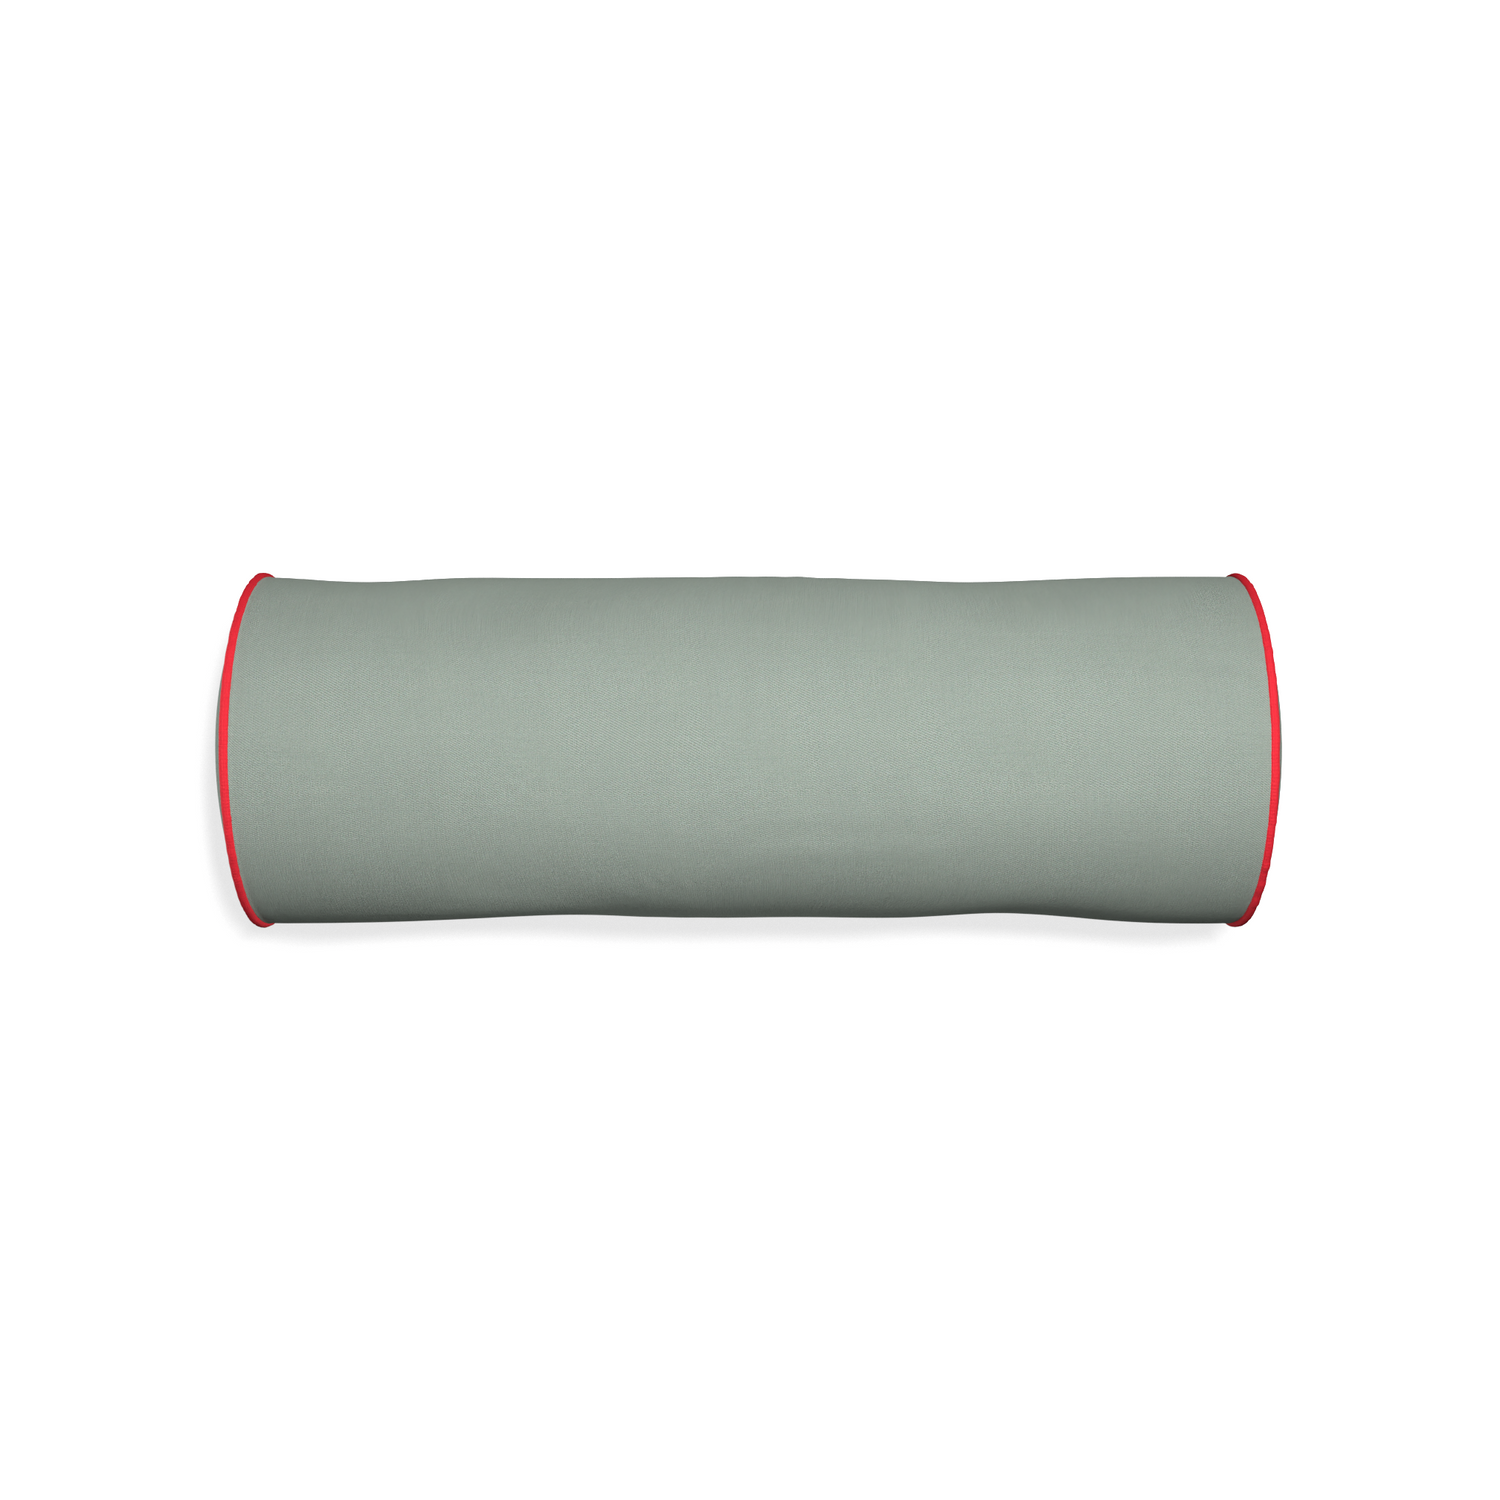 Bolster sage custom sage green cottonpillow with cherry piping on white background